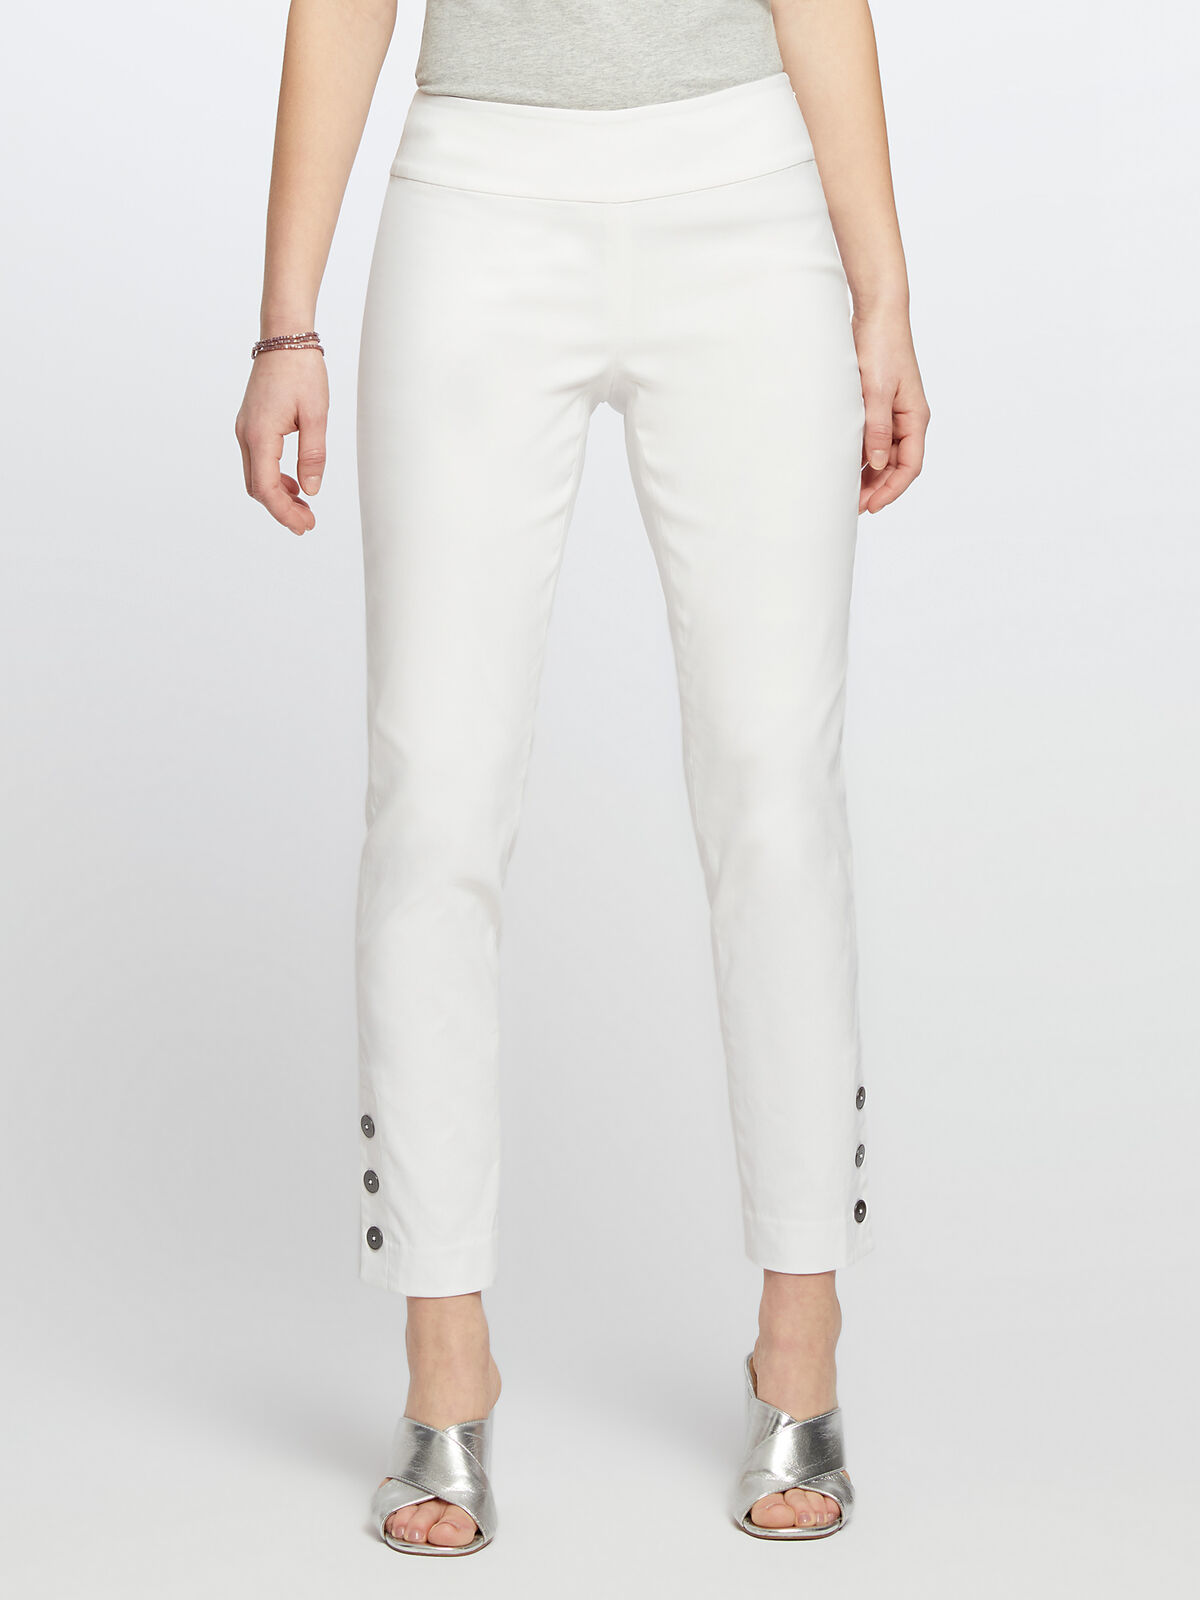  Buttoned Up Cotton Wonderstretch Pant